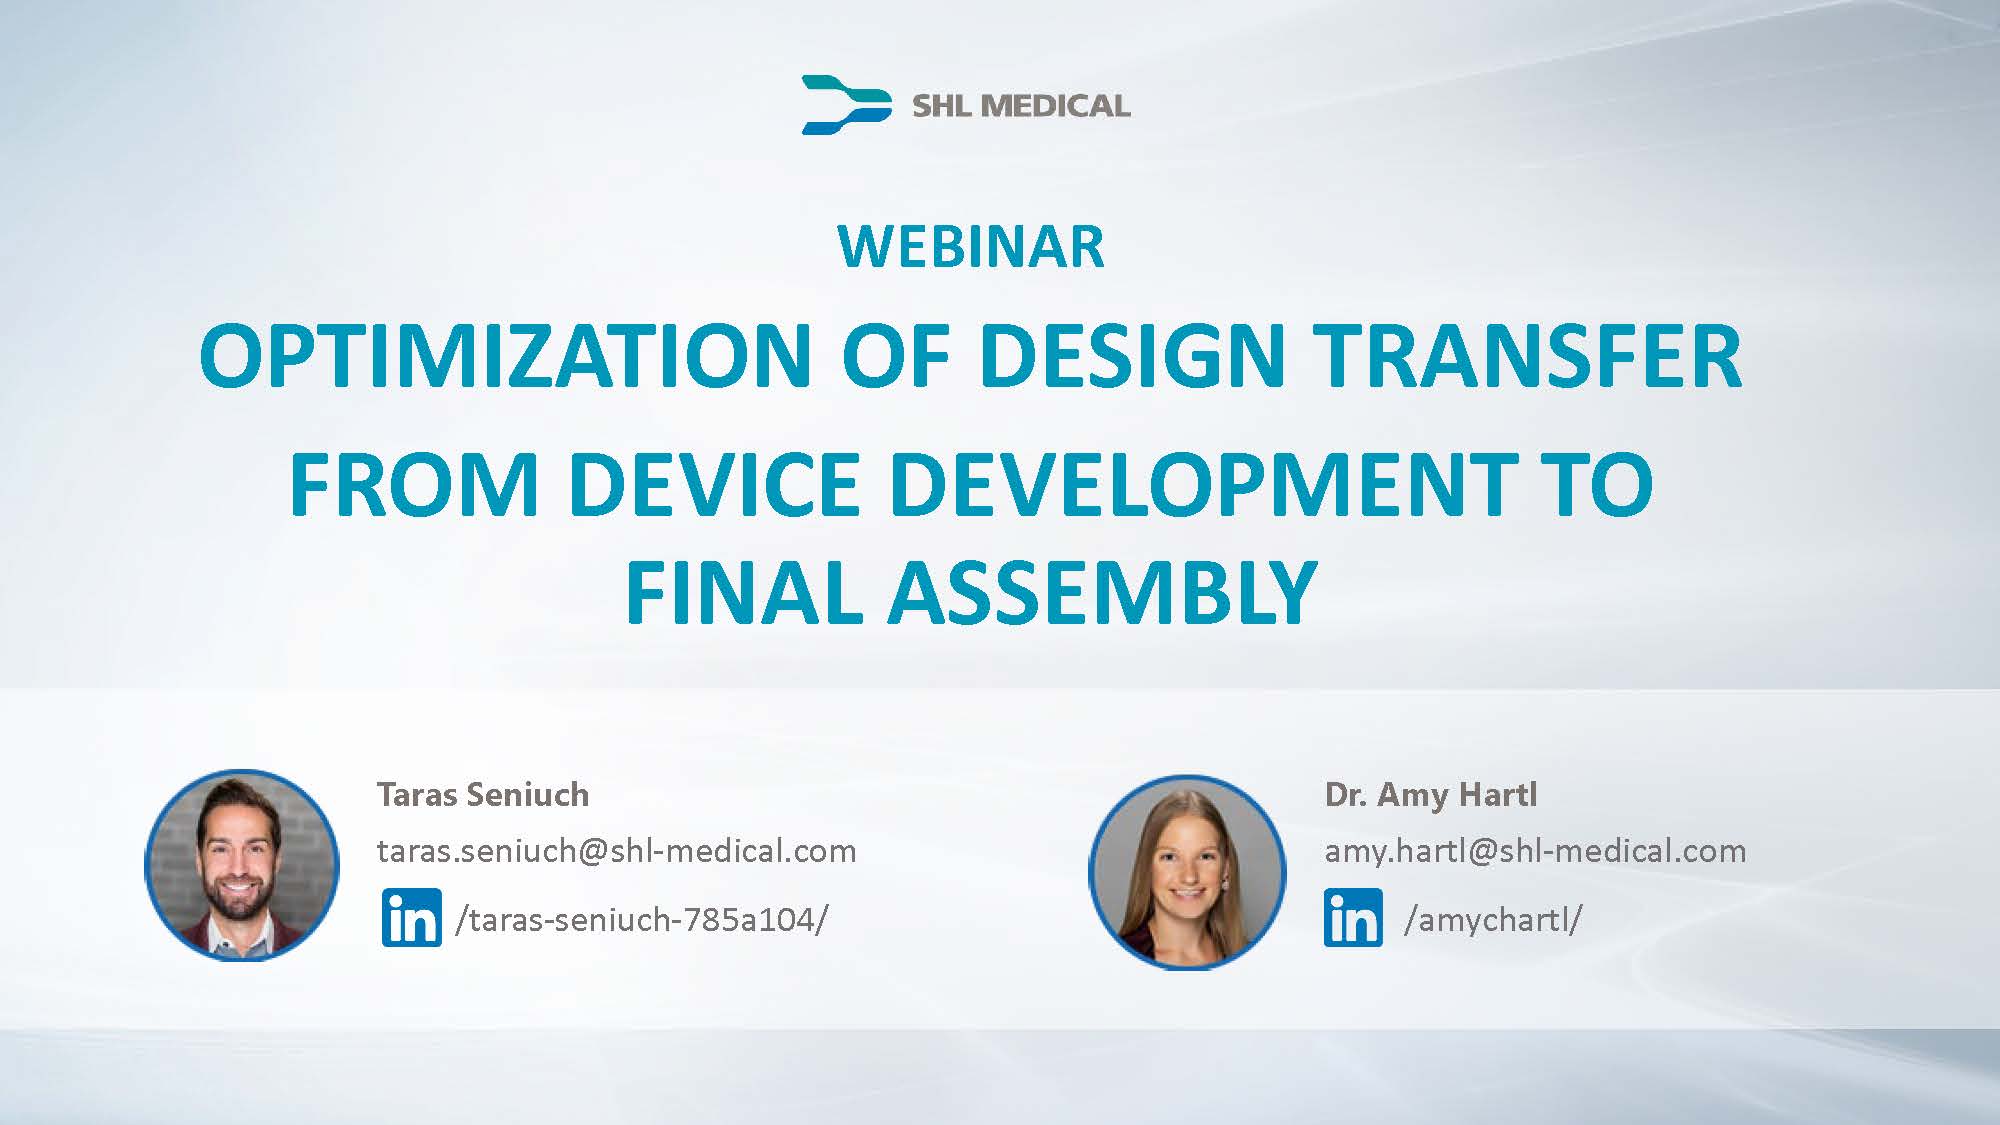 Thumbnail image for SHL Medical webinar titled "Optimization of Design Transfer from Device Development to Final Assembly" download featuring Taras Seniuch and Amy Hartl from SHL Medical